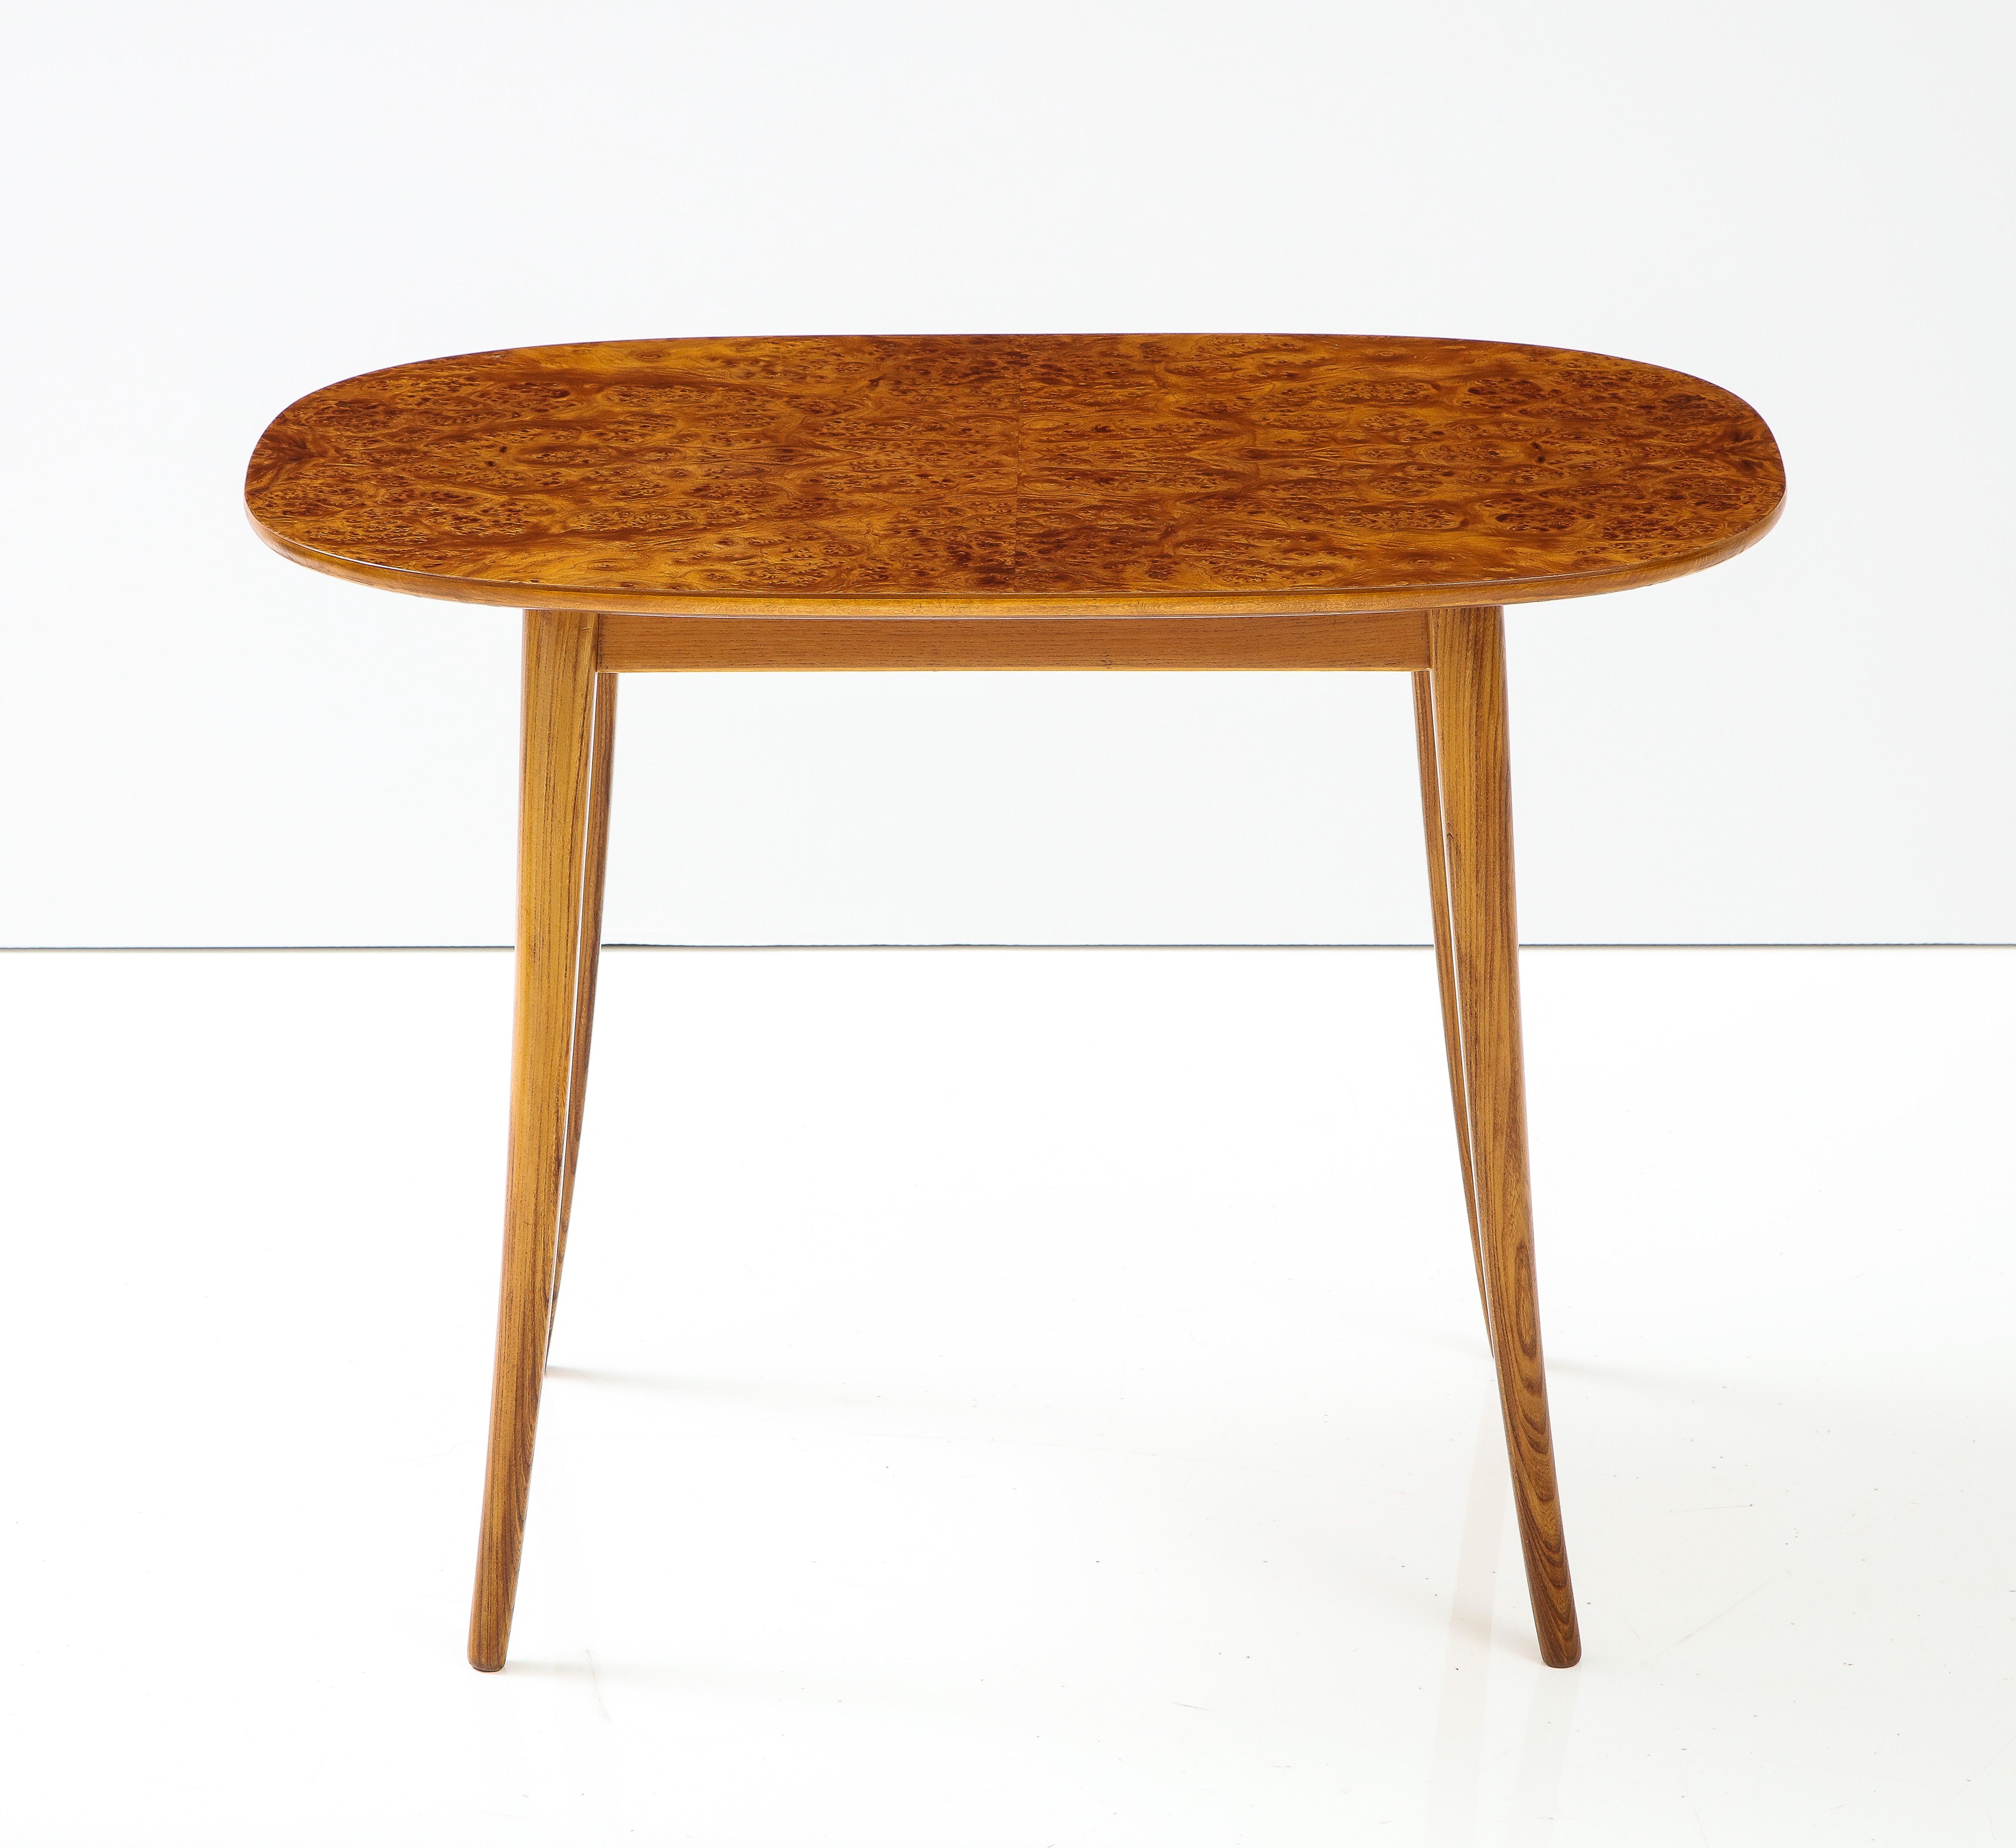 A Swedish Modern elm root side table, circa 1940s, the oblong figured elm root top raised on sabre legs.